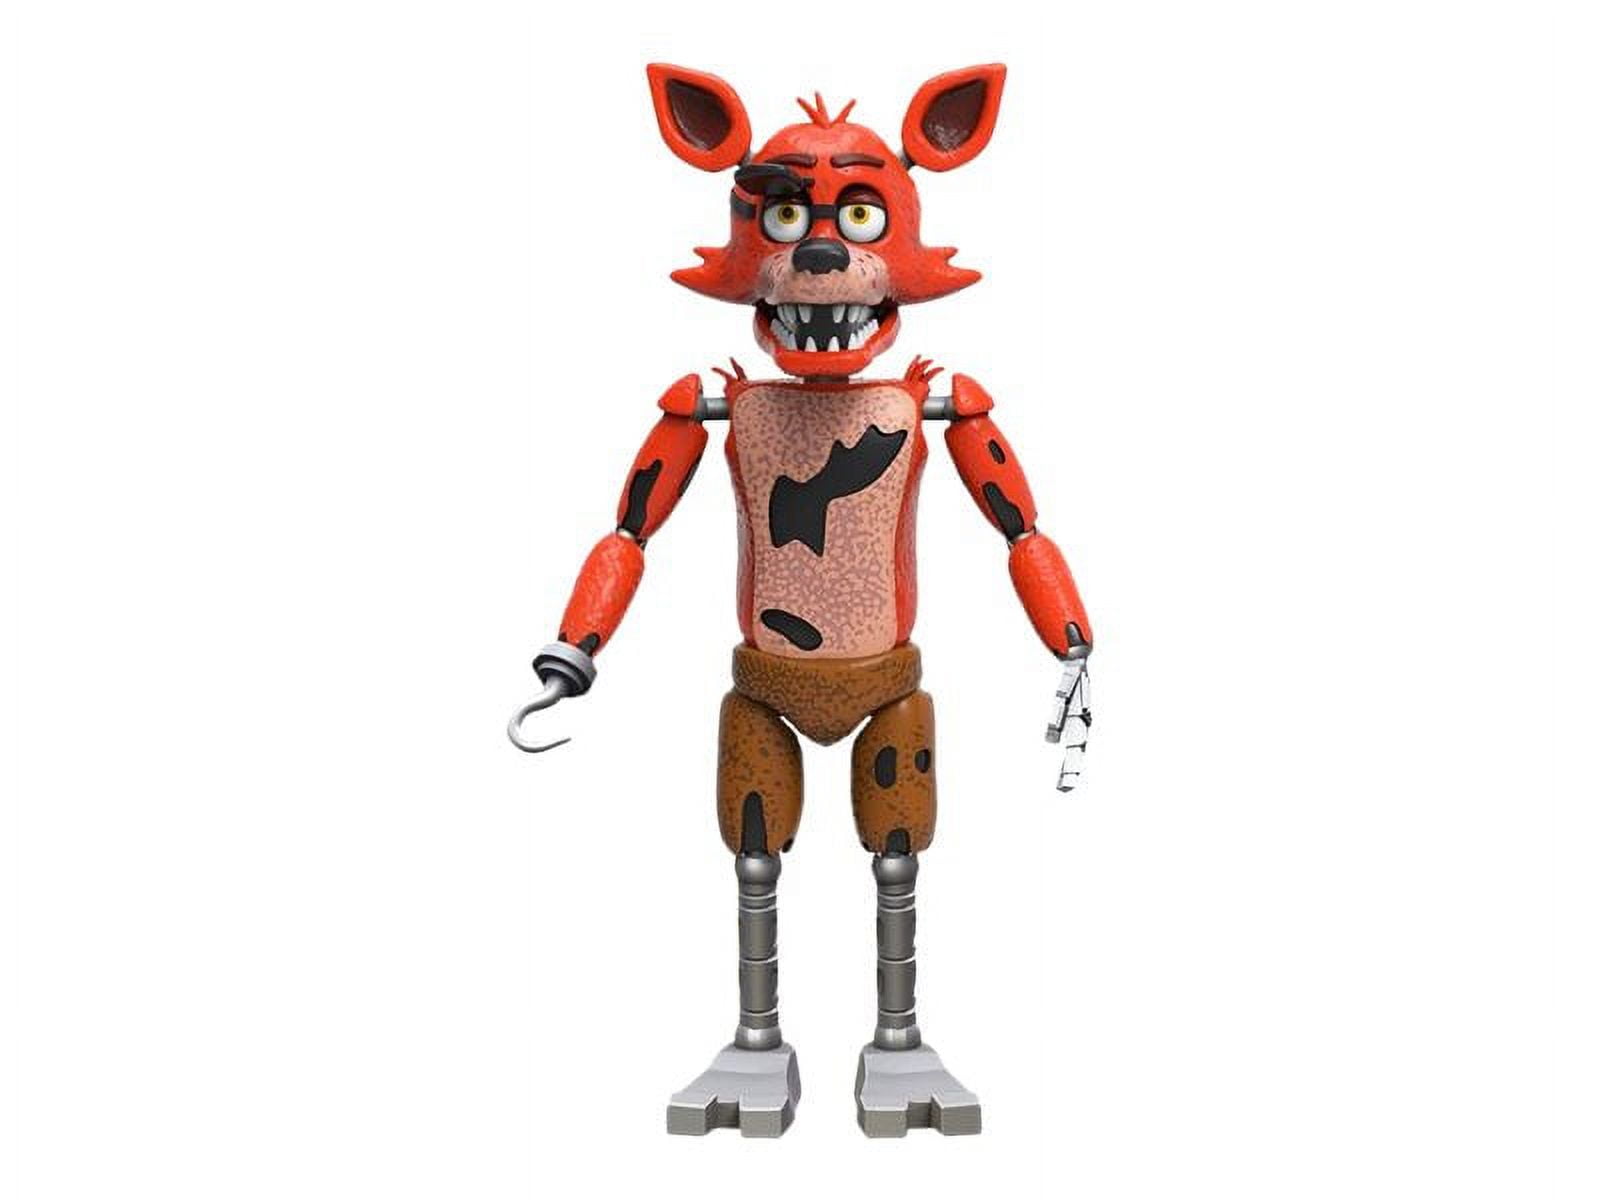 dee jay chronic recommends pictures of foxy from five nights at freddys pic